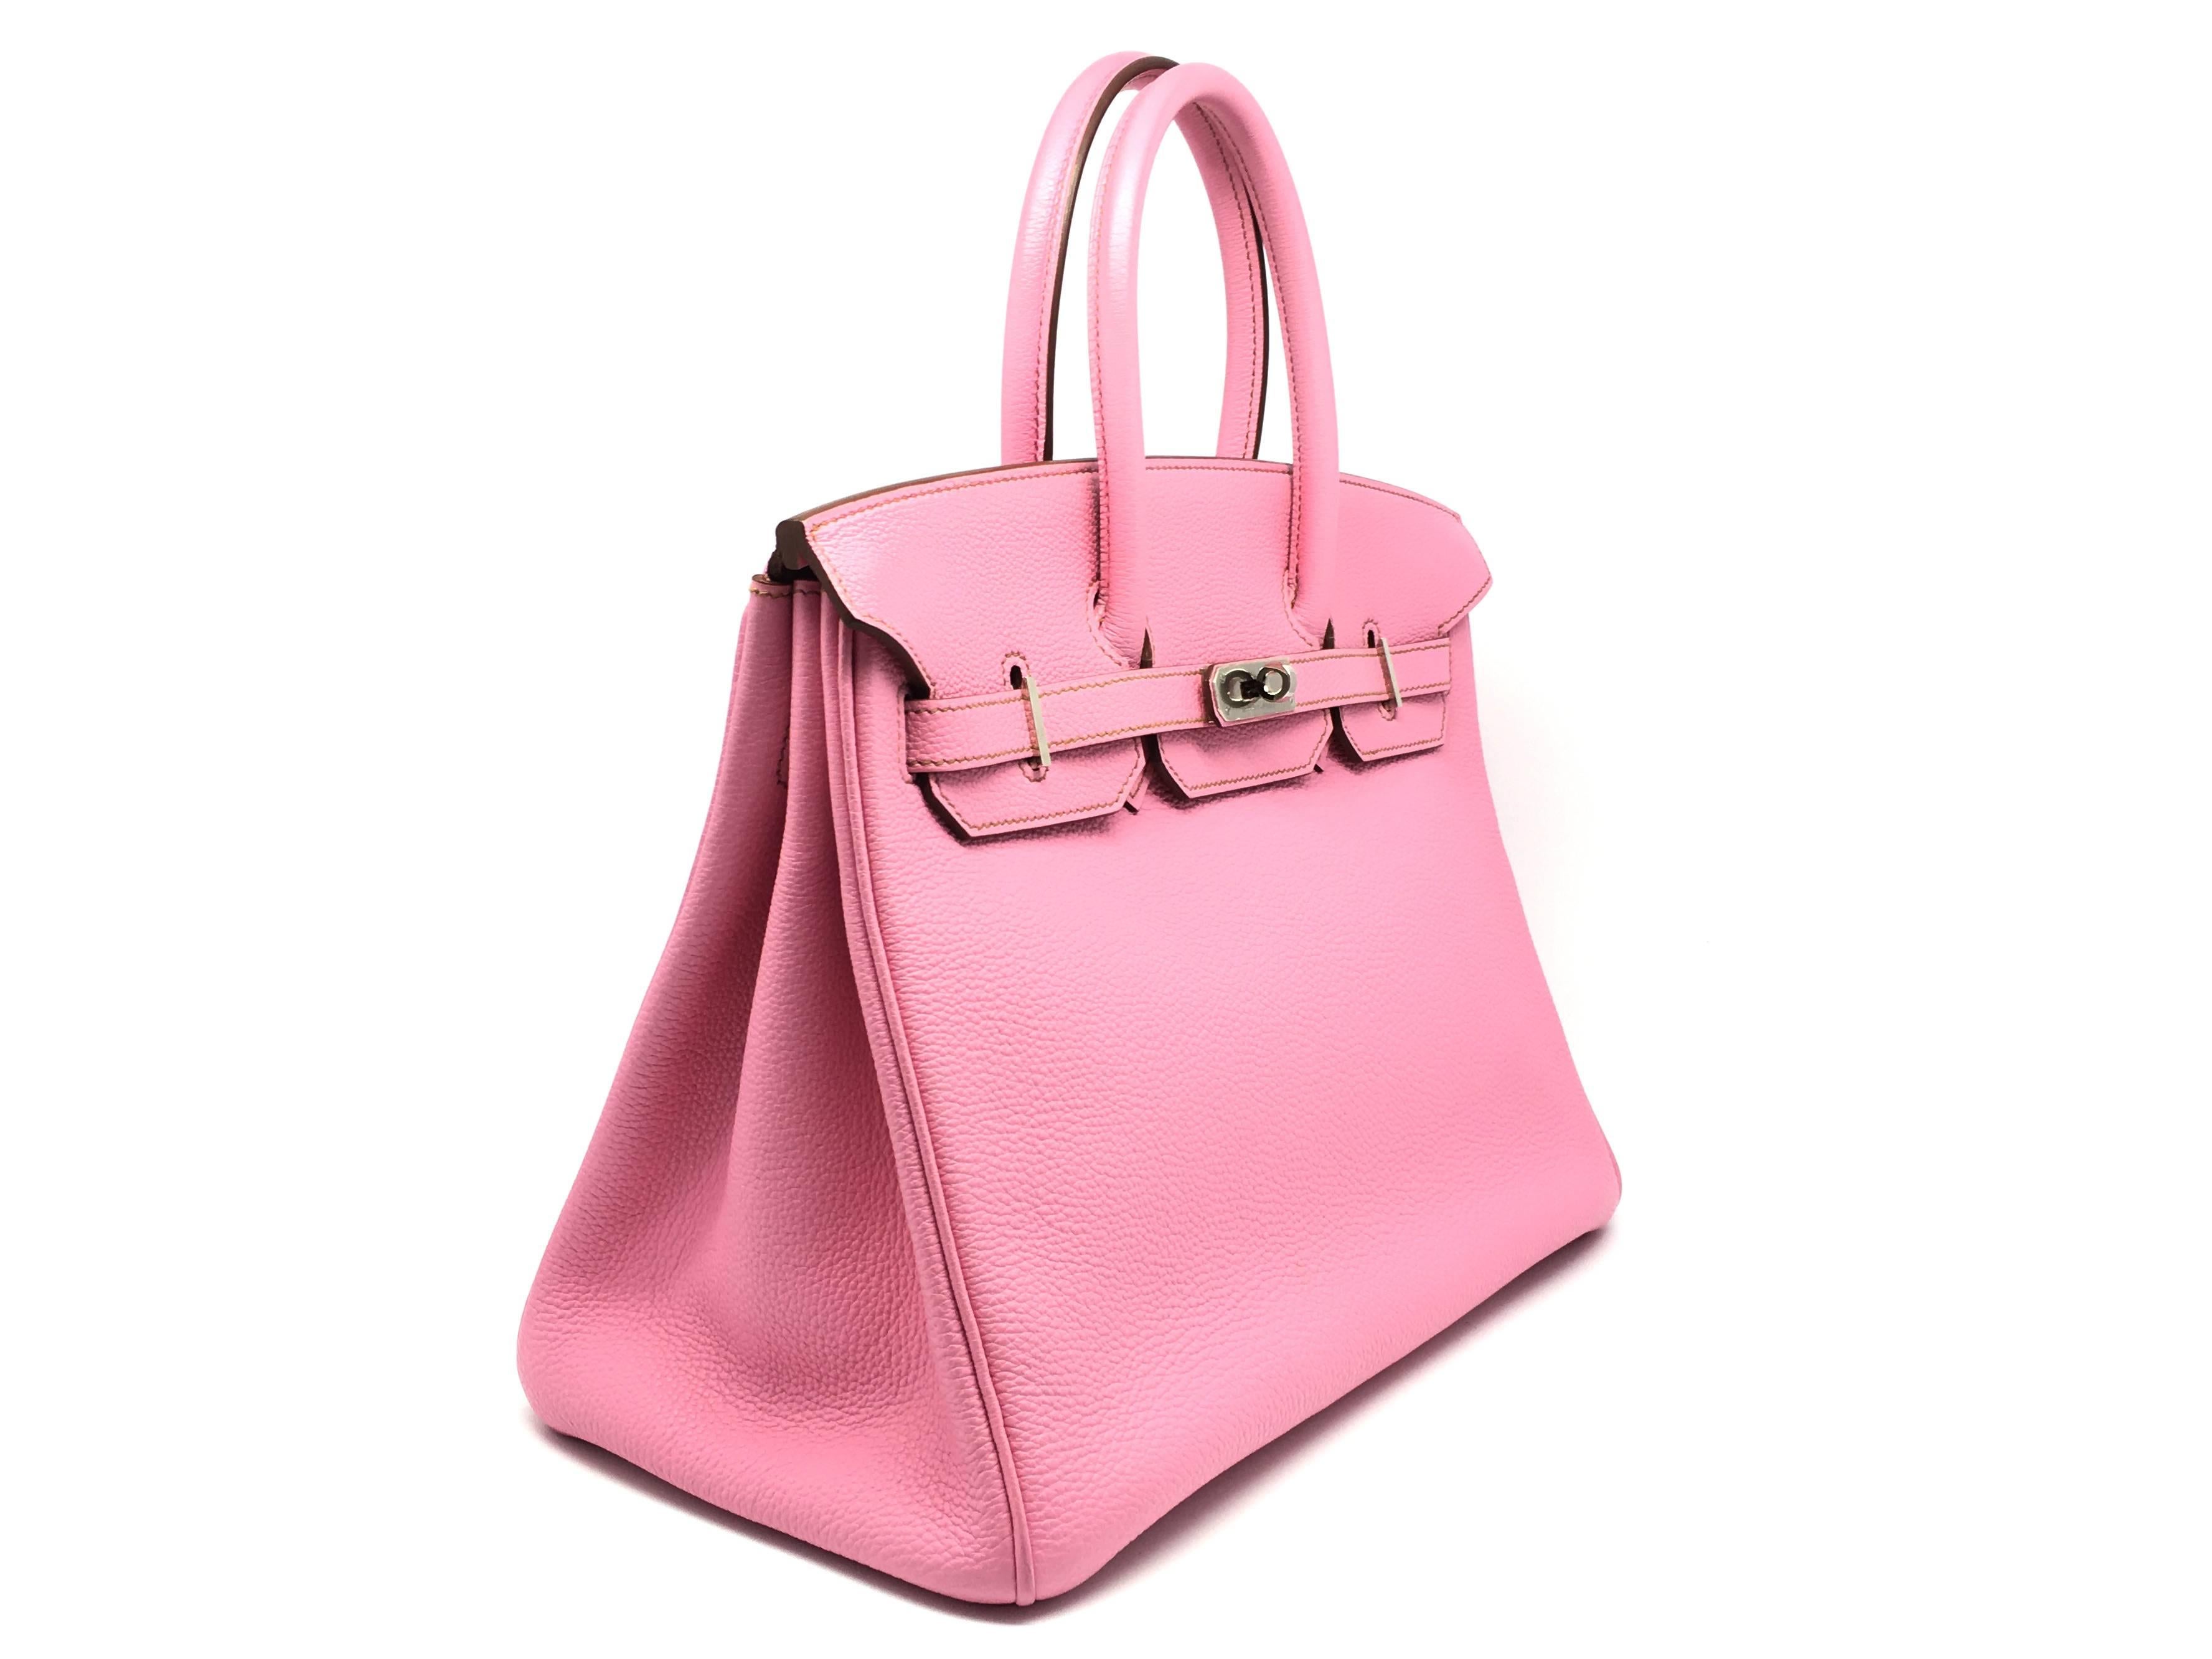 Color: Pink / Rose Shocking (designer color) 

Material: Togo Leather 

Condition: Rank A 
Overall: Good, few minor defects. 
Surface: Minor Stains
Corners: Minor Scratches
Edges: Minor Scratches
Handles/Straps: Minor Stains
Hardware: